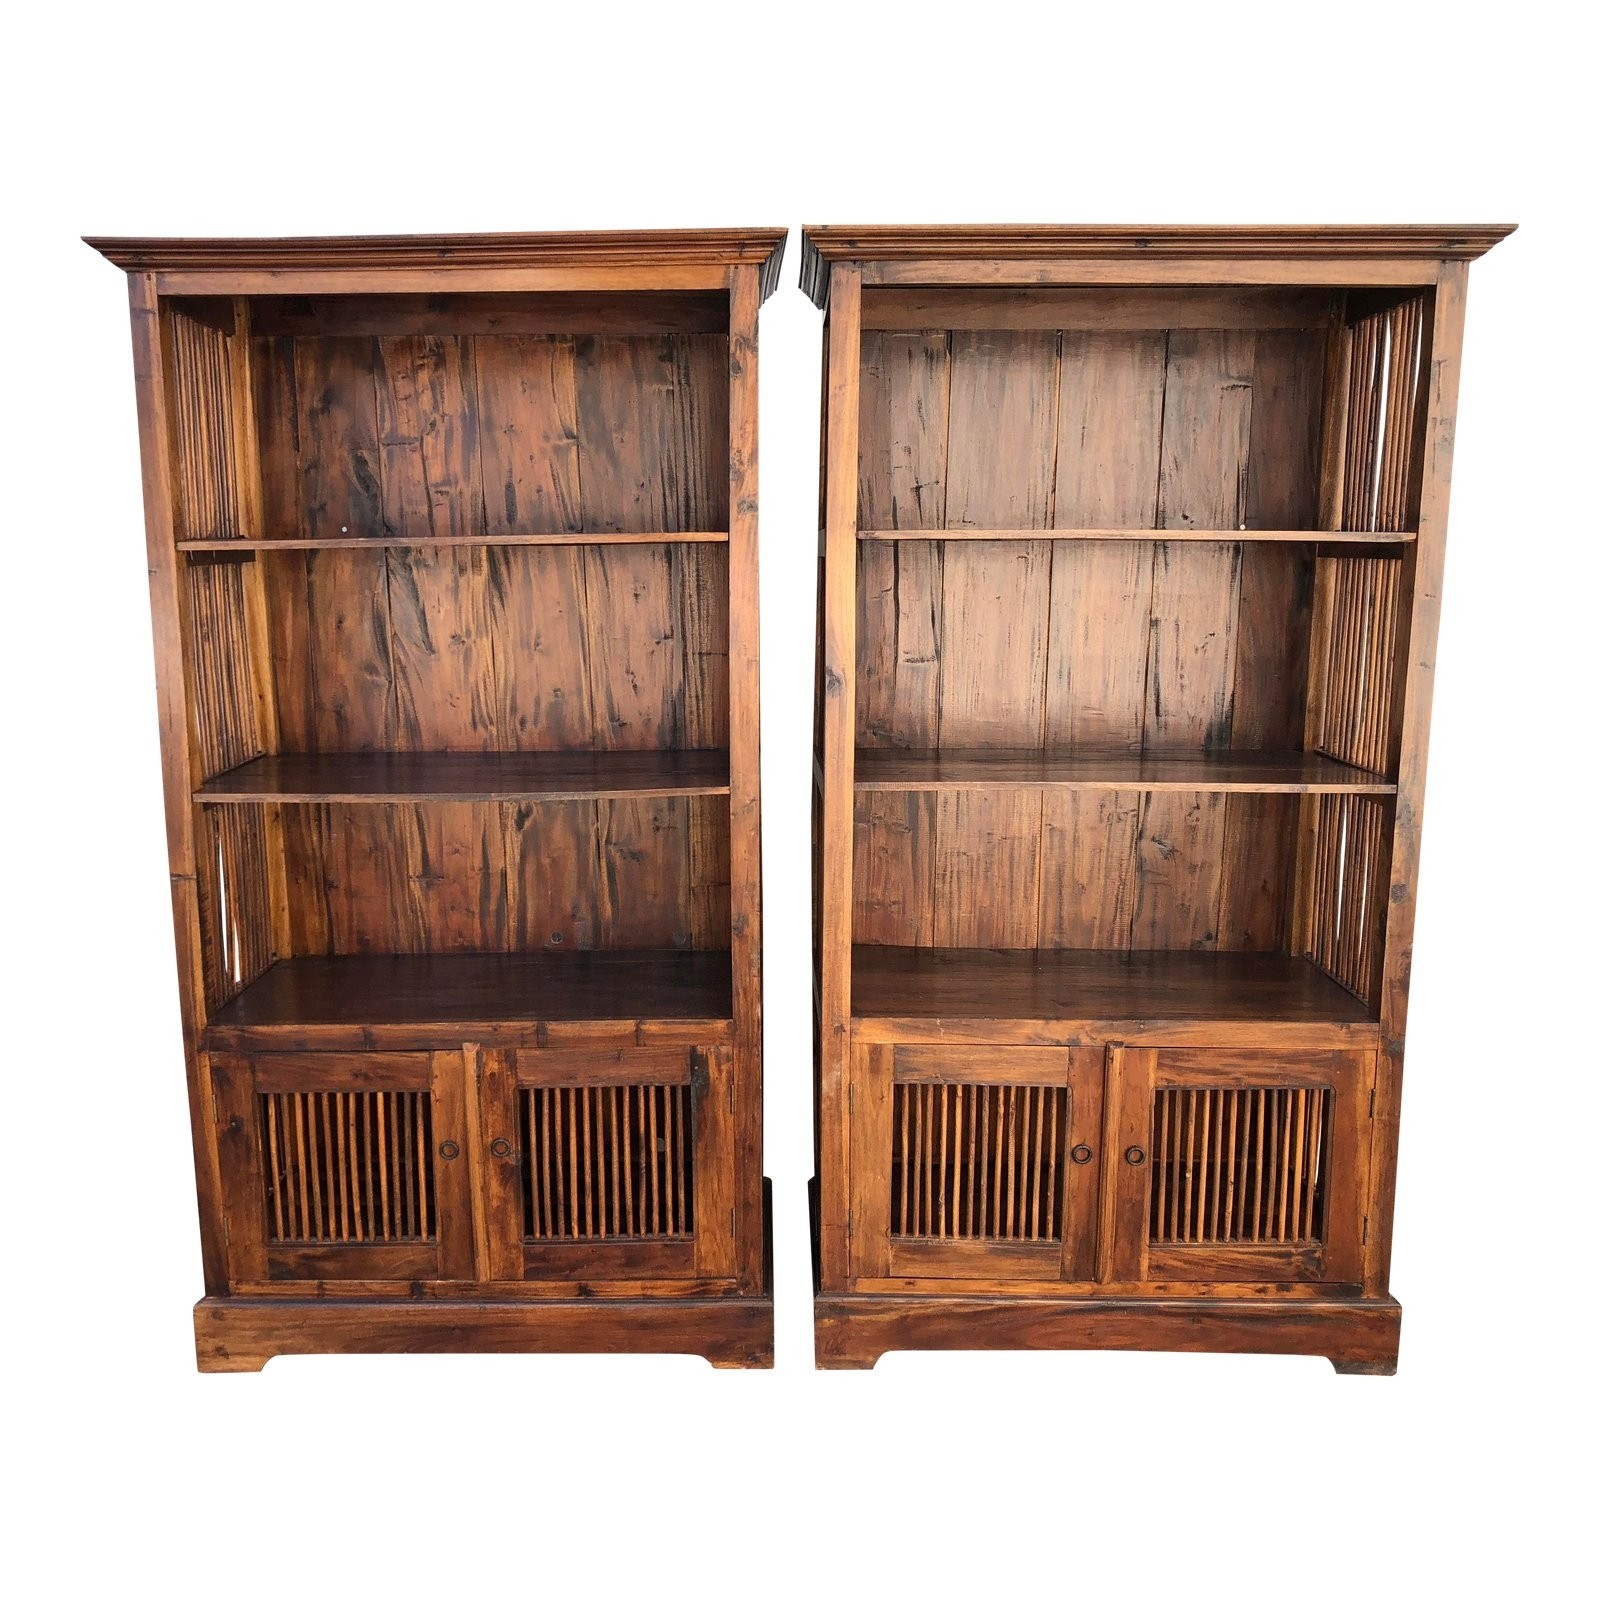 Asian balinese reed bookcases a pair design plus gallery